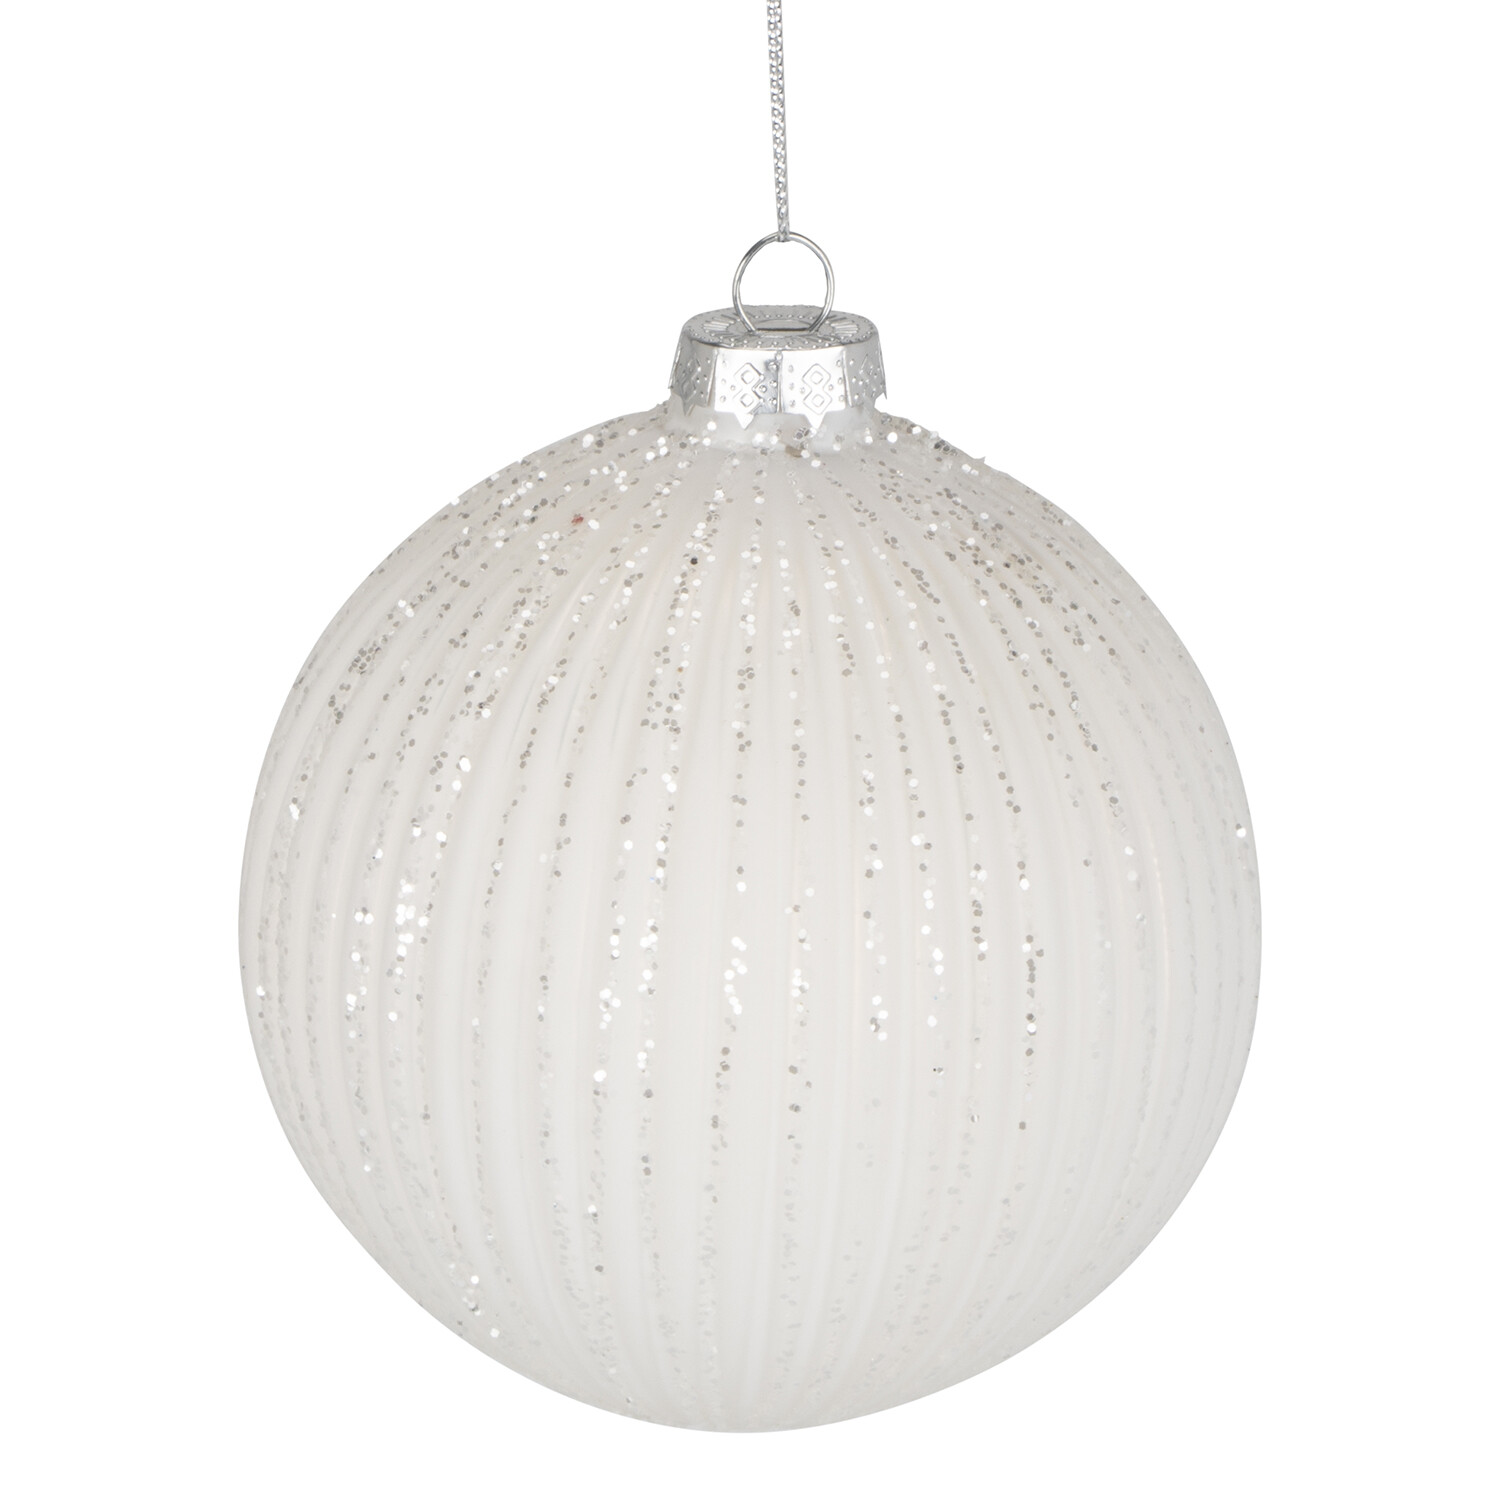 Frosted Fairytale White Glitter Striped Bauble Image